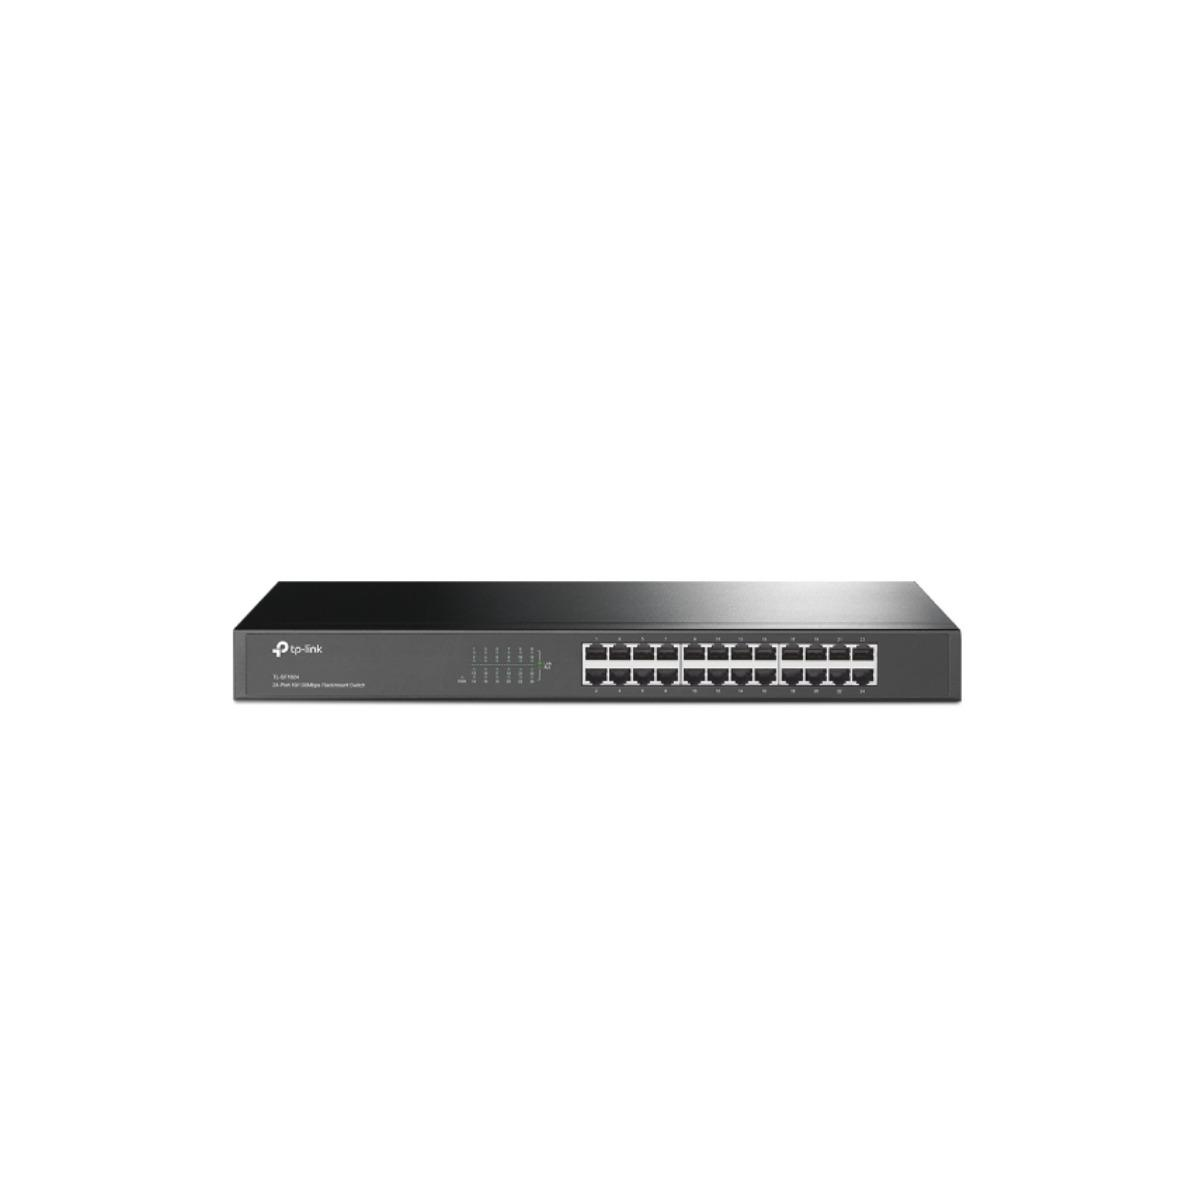 Switch TP-LINK TP-Link TL-SF1024 24-Port-10/100Mbit/s-Rackmount-Switch 24